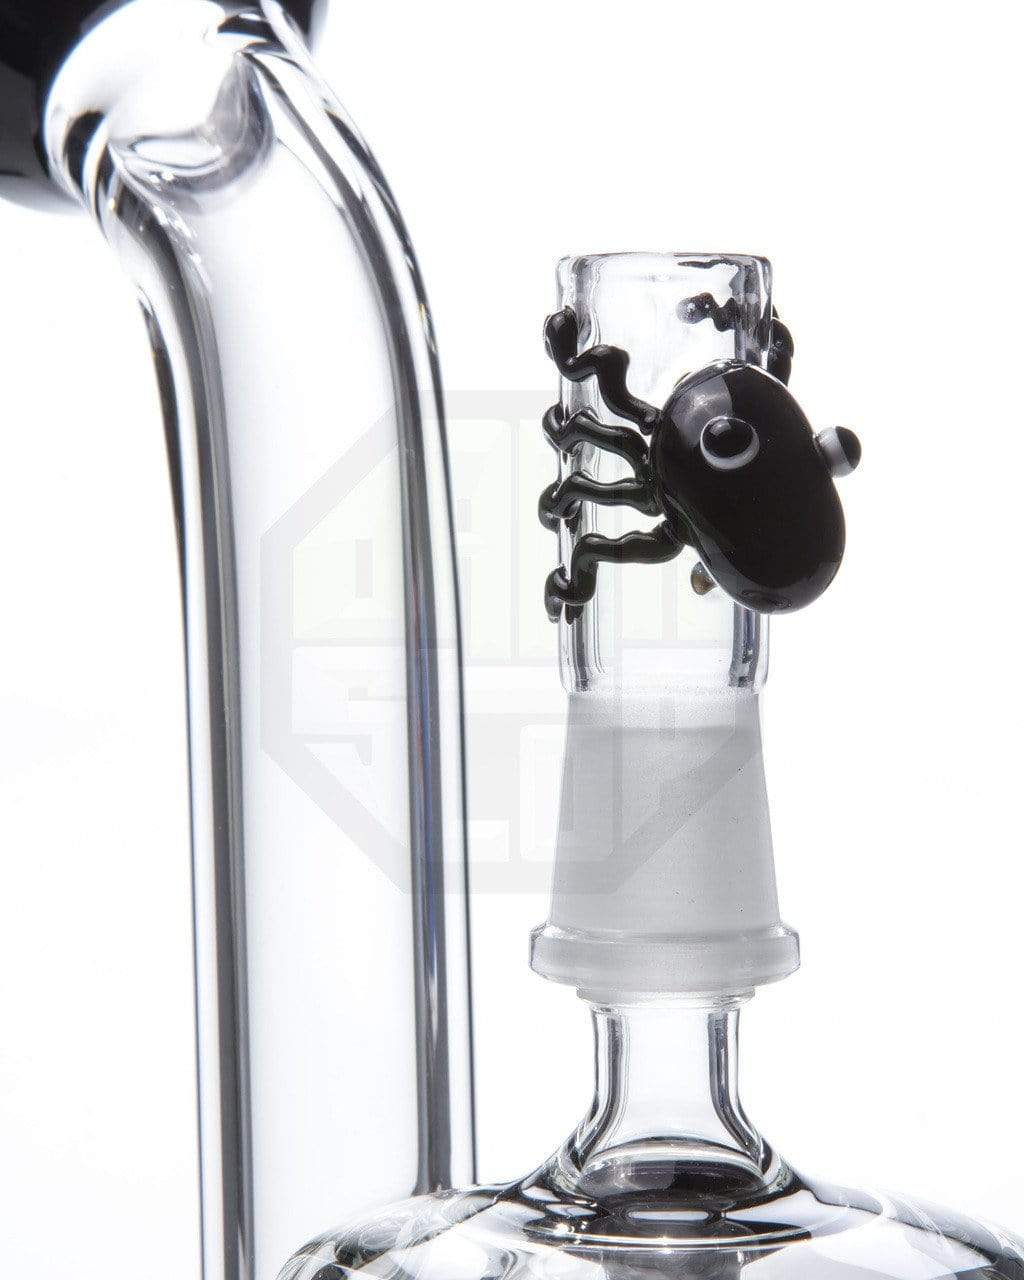 https://www.dankstopus.shop/wp-content/uploads/1692/51/our-clearance-is-a-great-option-to-save-money-while-also-receive-anchor-perc-dab-rig-mathematix_5.jpg